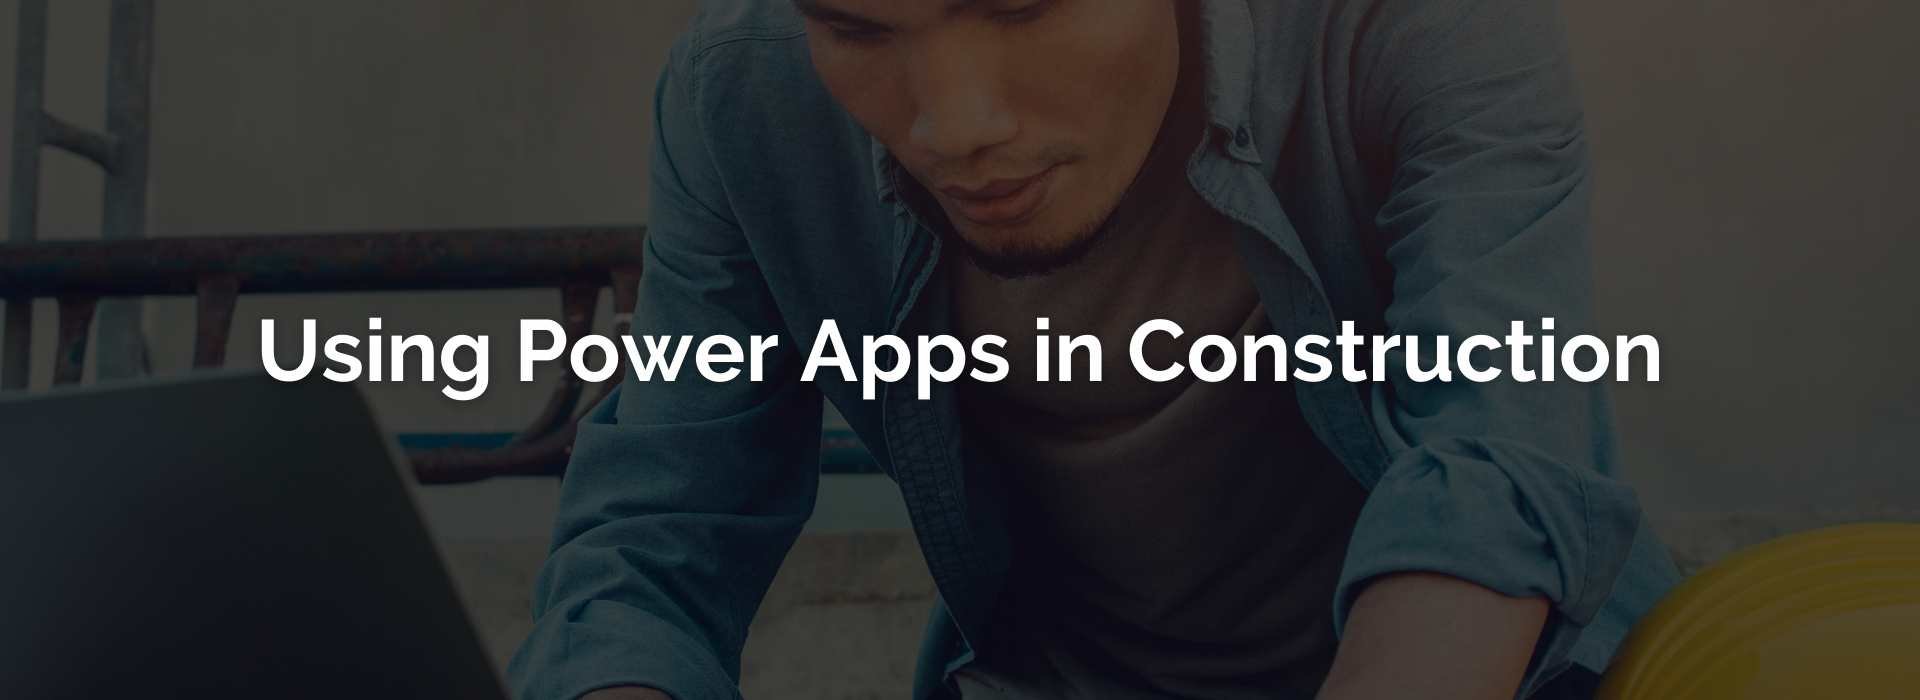 USING POWER APPS IN CONSTRUCTION